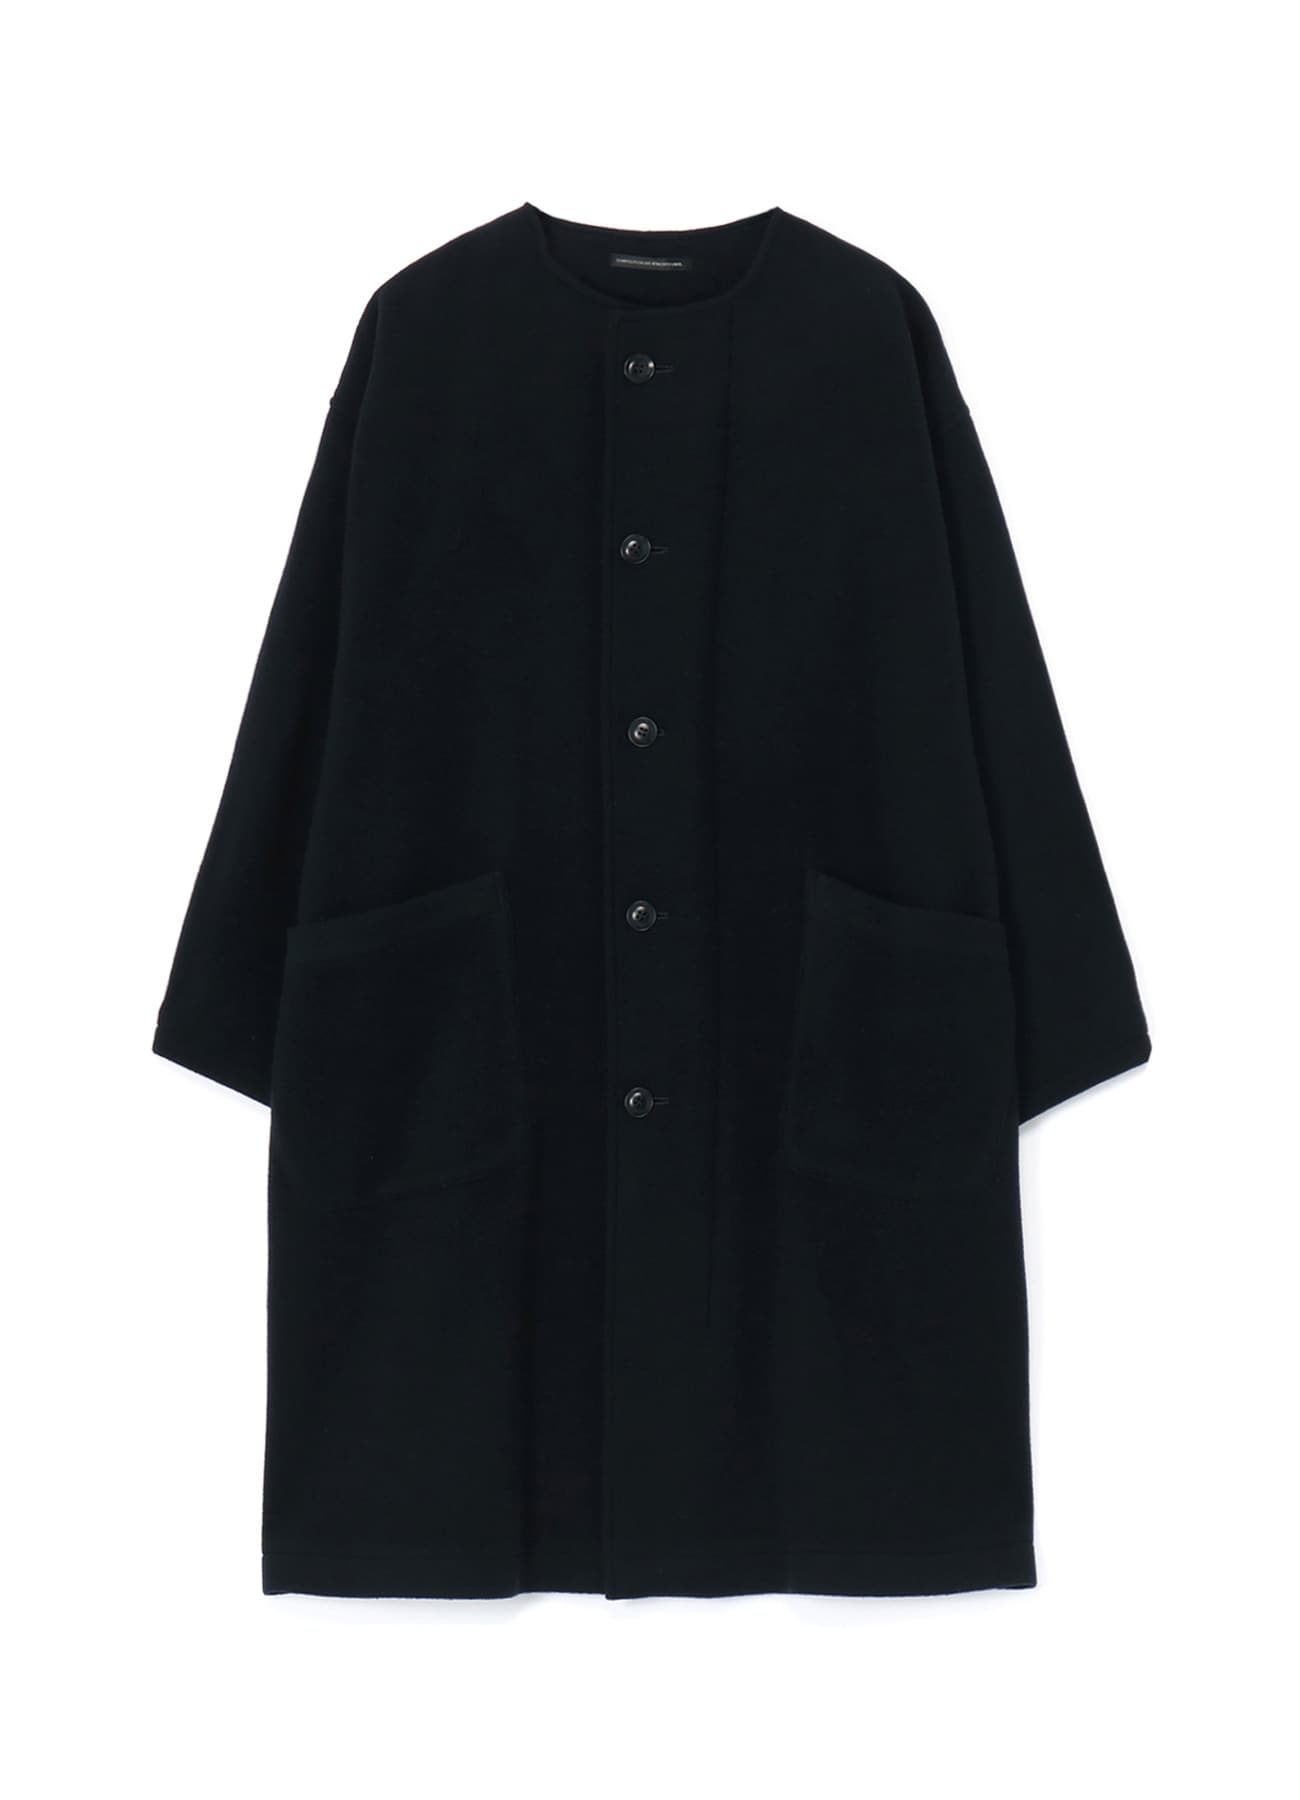 New Arrival | [Official] THE SHOP YOHJI YAMAMOTO (2/13 page)